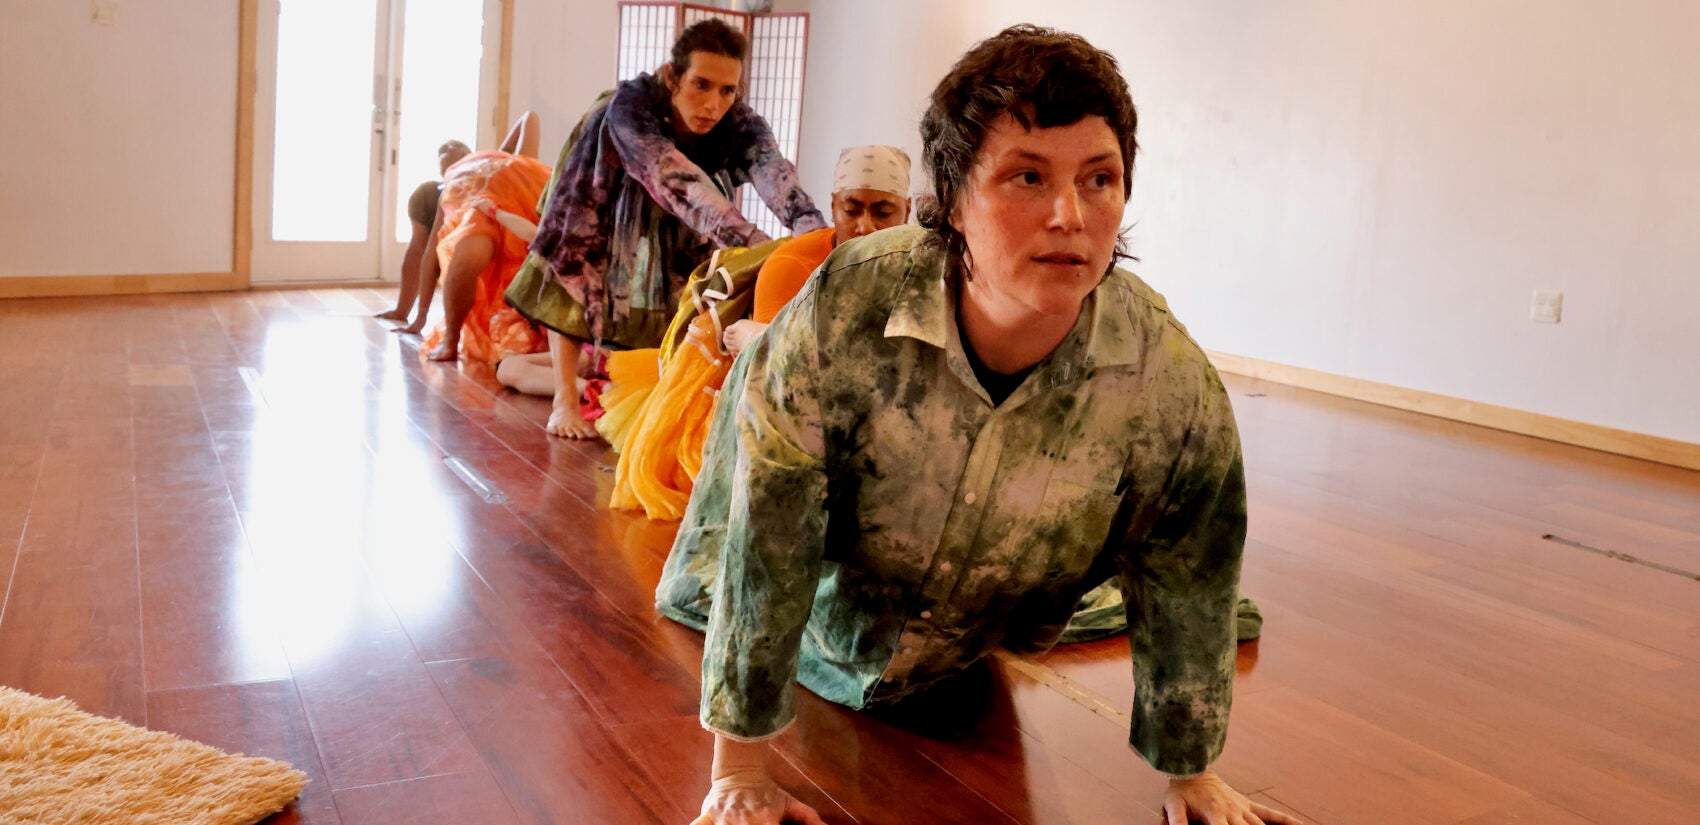 Meg Foley and other dancers perform a dance called ''Carpet Womb'